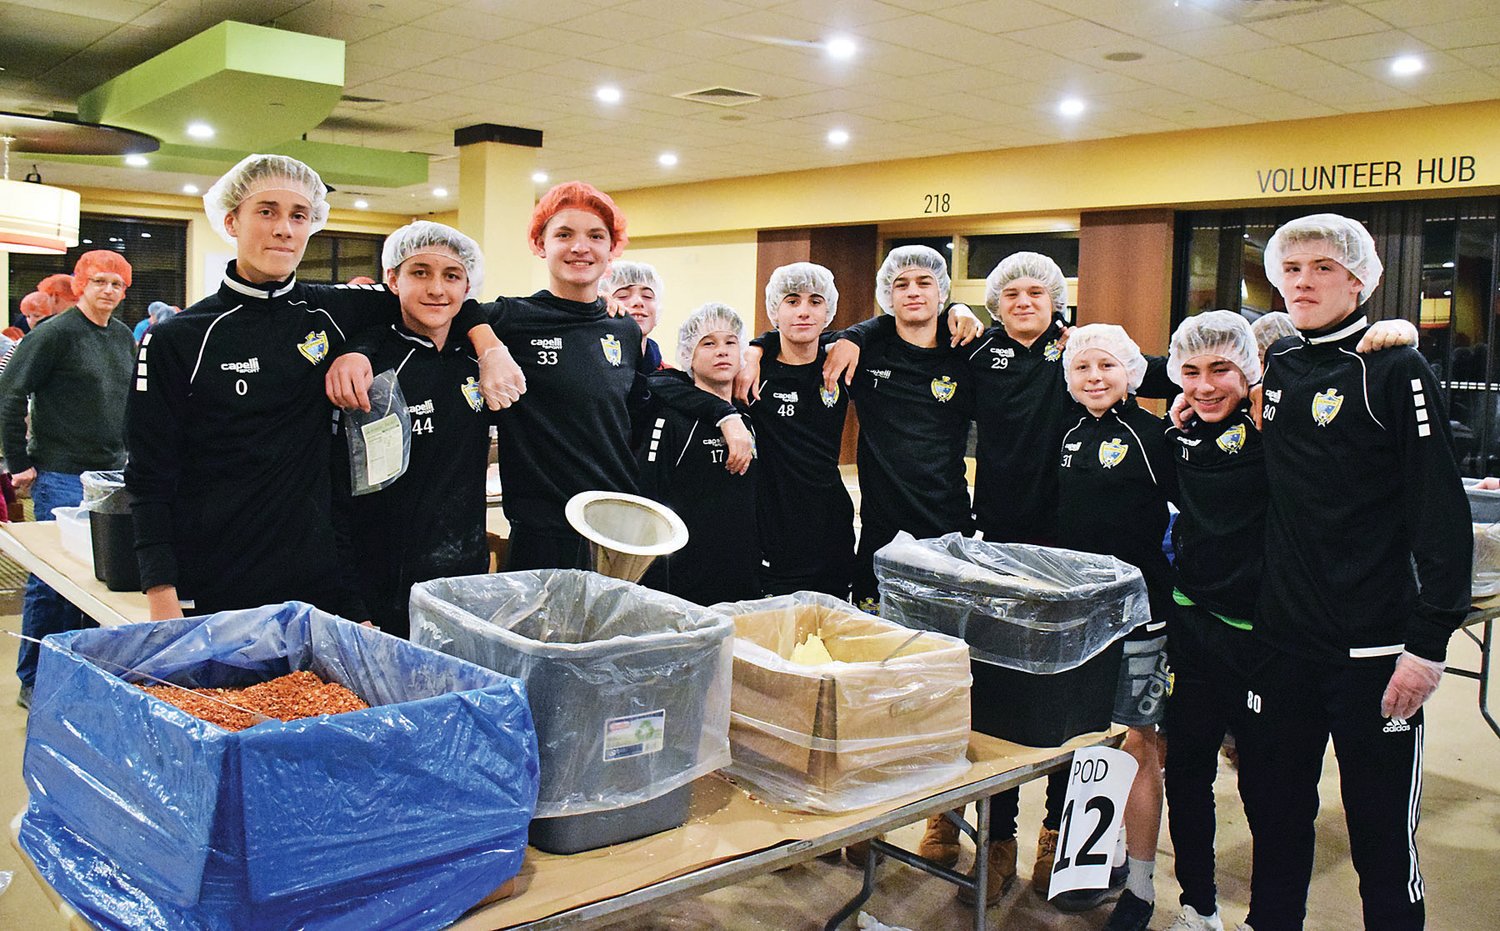 Volunteers from the PA Dominion Harleysville Football Club, European Soccer.